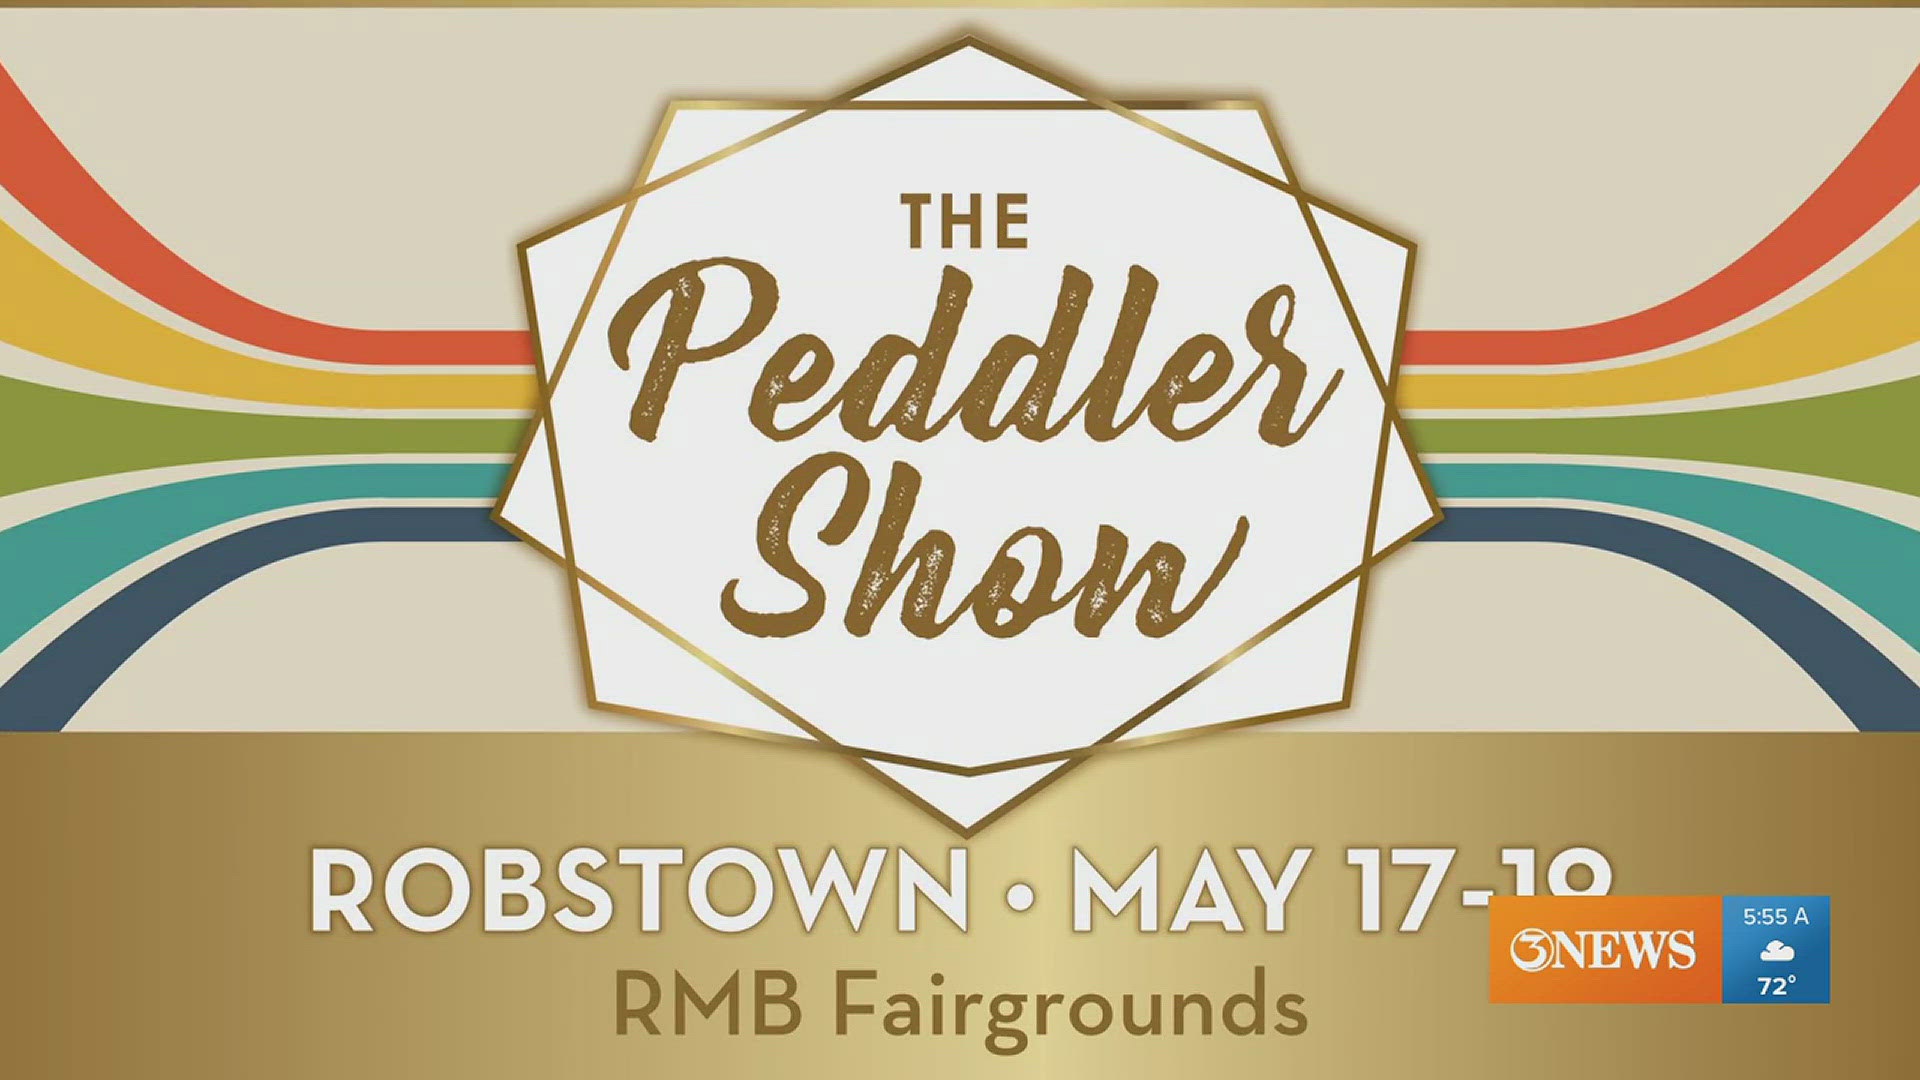 There is so much happening this weekend, Coastal Bend! From the Peddler Show to the Oz Experience and Beach to Bay, we are sure you will have plenty to do!